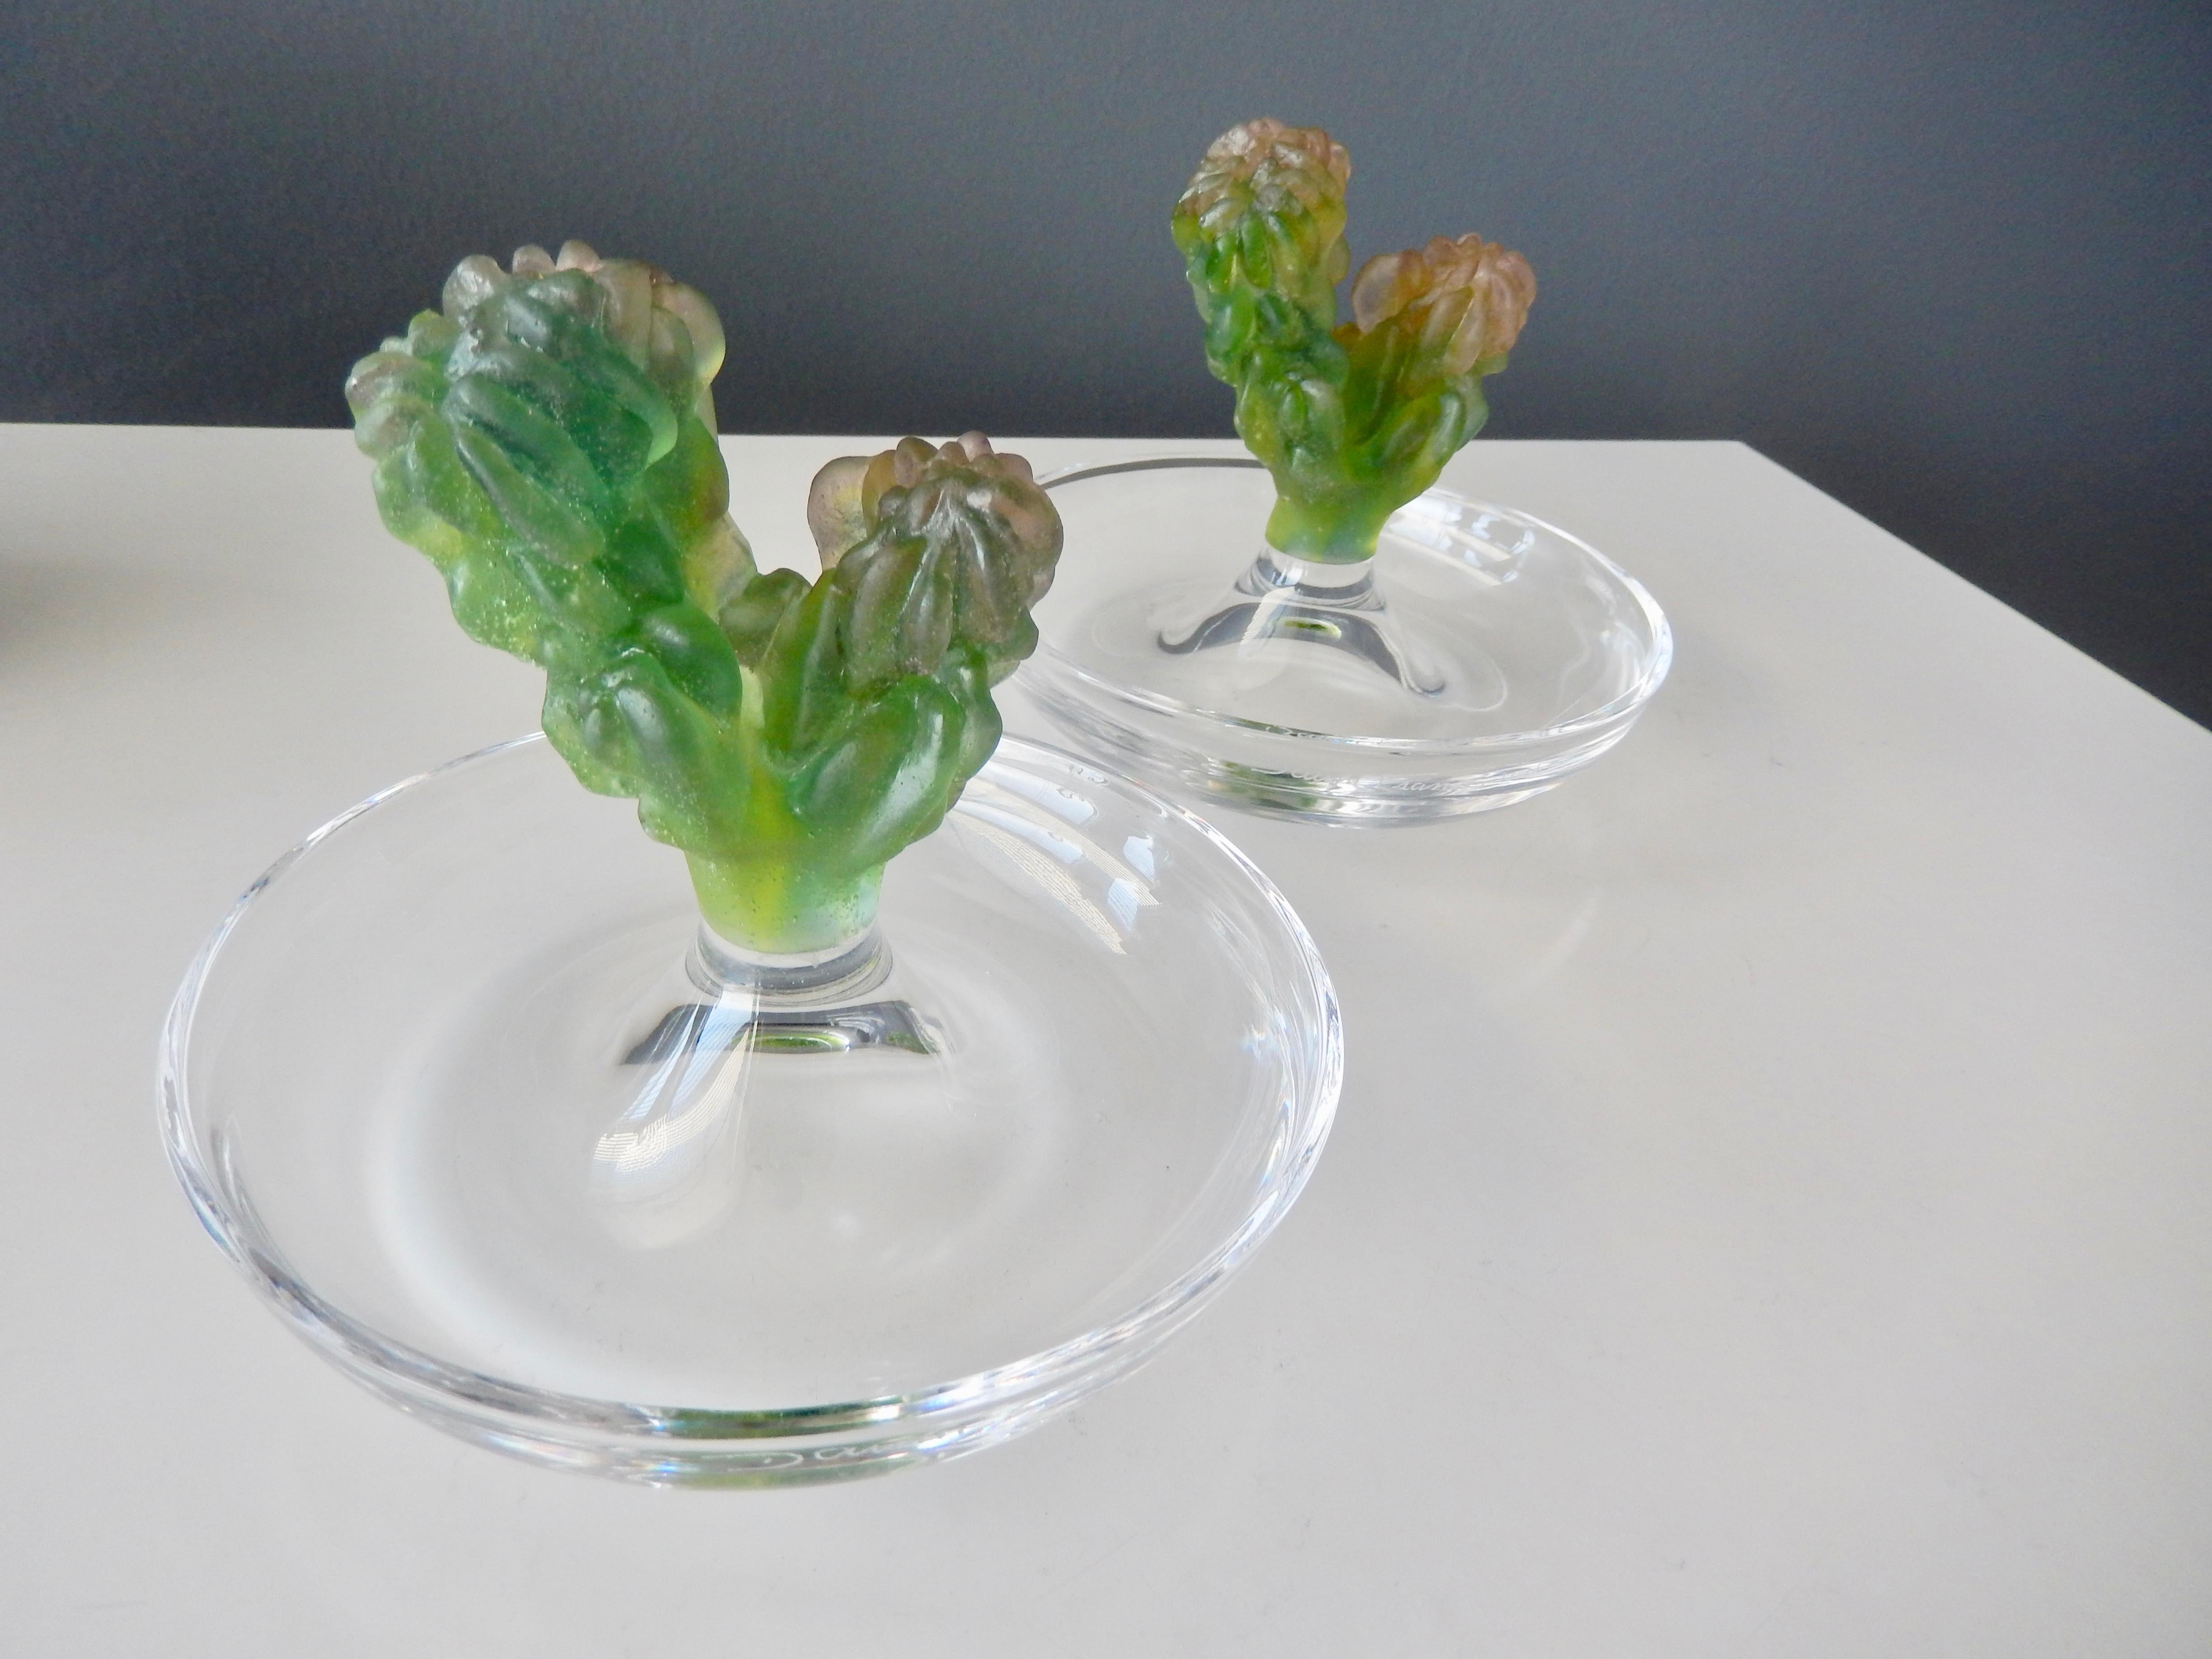 A pair of crystal dishes by Daum with a pâte de verre cactus design by the American artist Joseph Hilton McConnico (1943-2018). In 1987 McConnico collaborated with Daum and created his iconic 